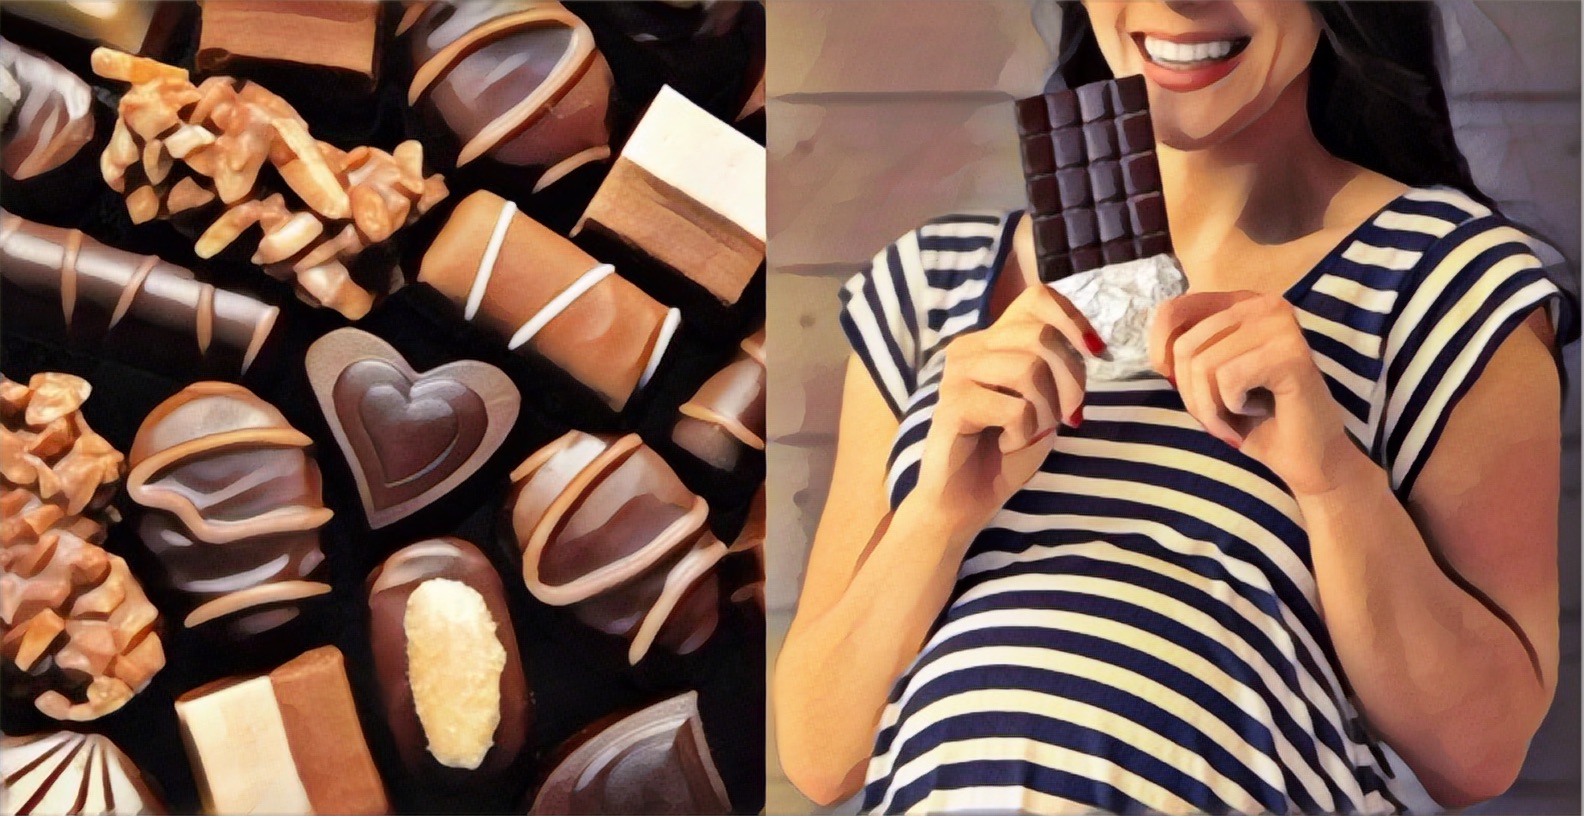 Should You Eat Chocolate While Pregnant